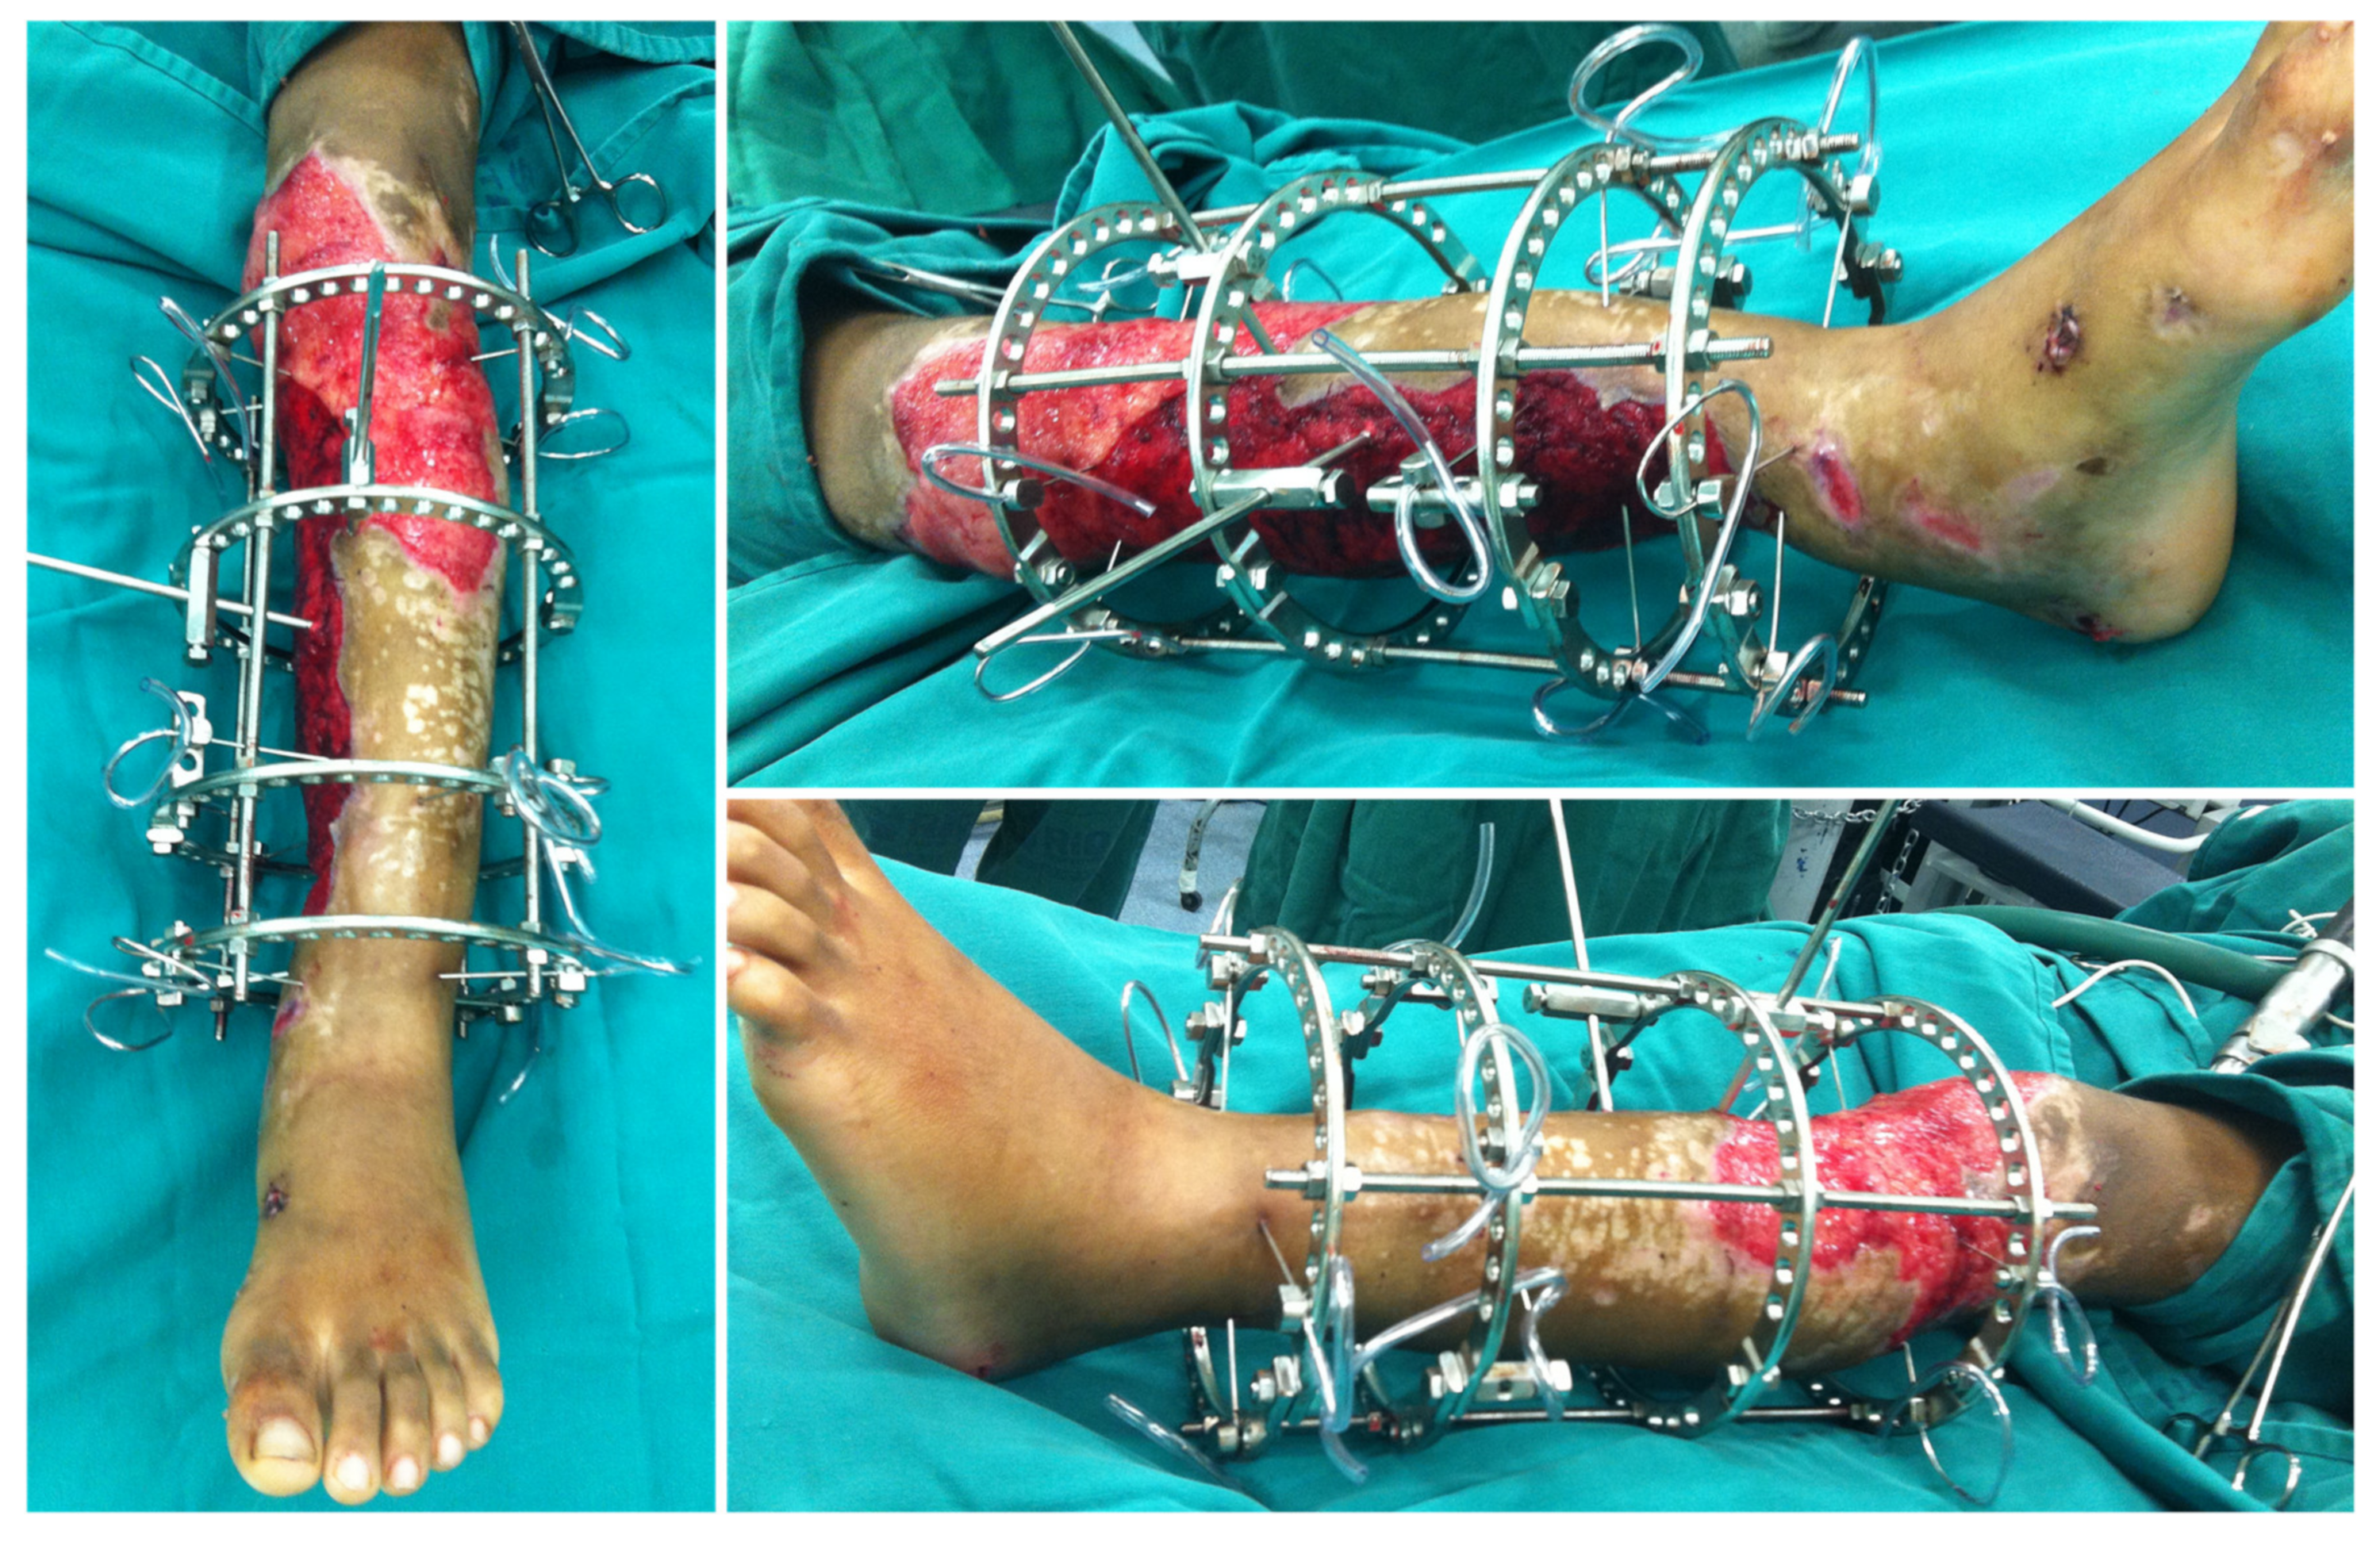 Medicina | Free Full-Text | Limb Salvage after Lower-Leg Fracture and  Popliteal Artery Transection—The Role of Vessel-First Strategy and Bone  Fixation Using the Ilizarov External Fixator Device: A Case Report | HTML